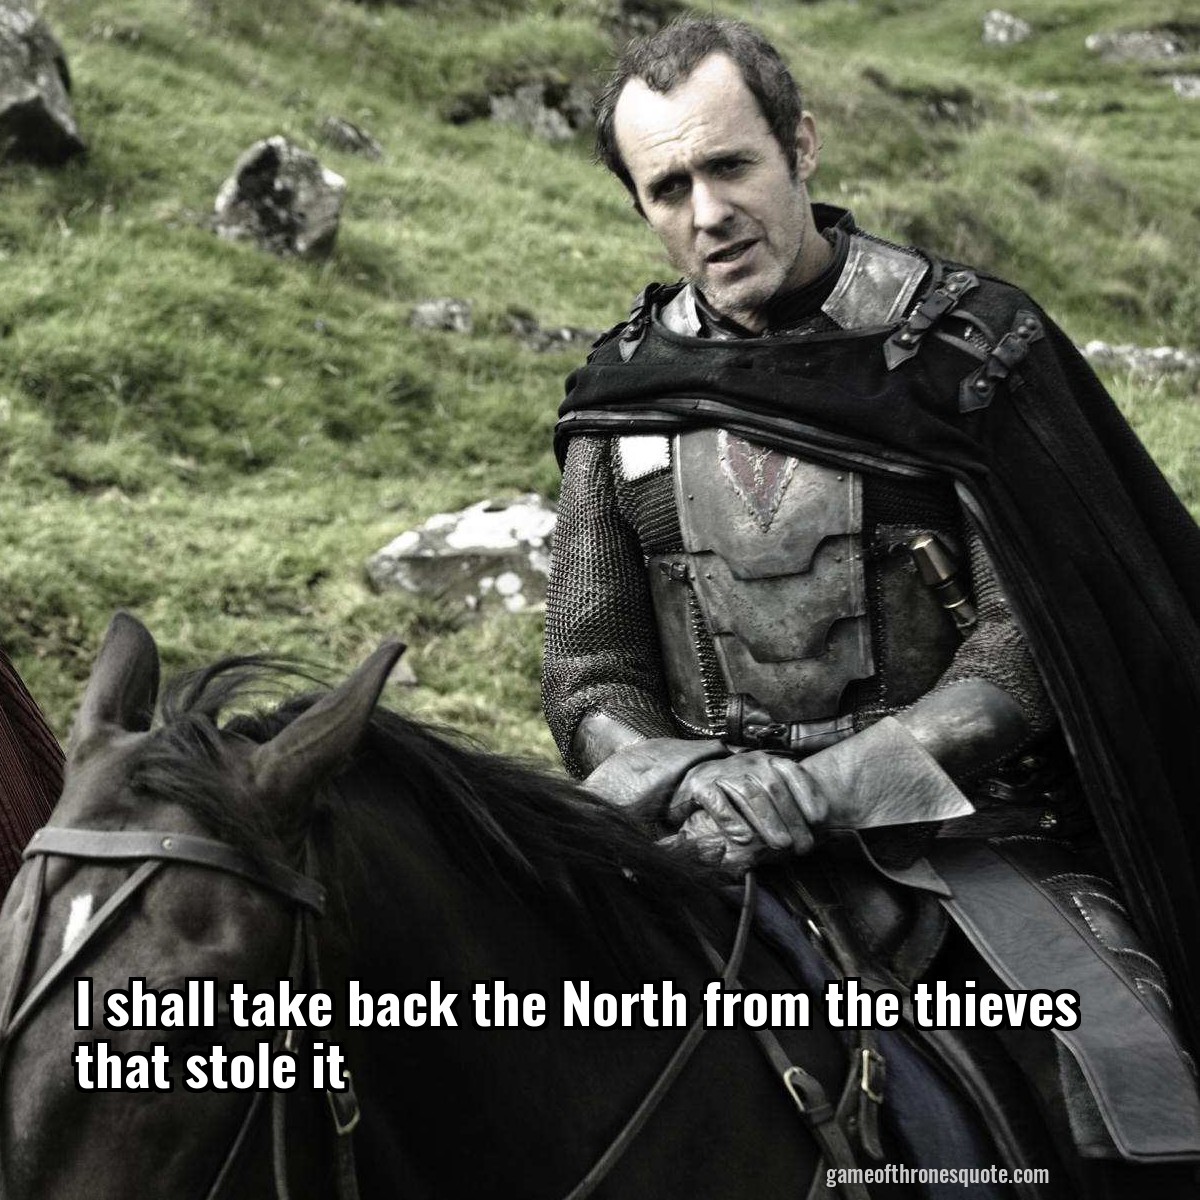 I shall take back the North from the thieves that stole it